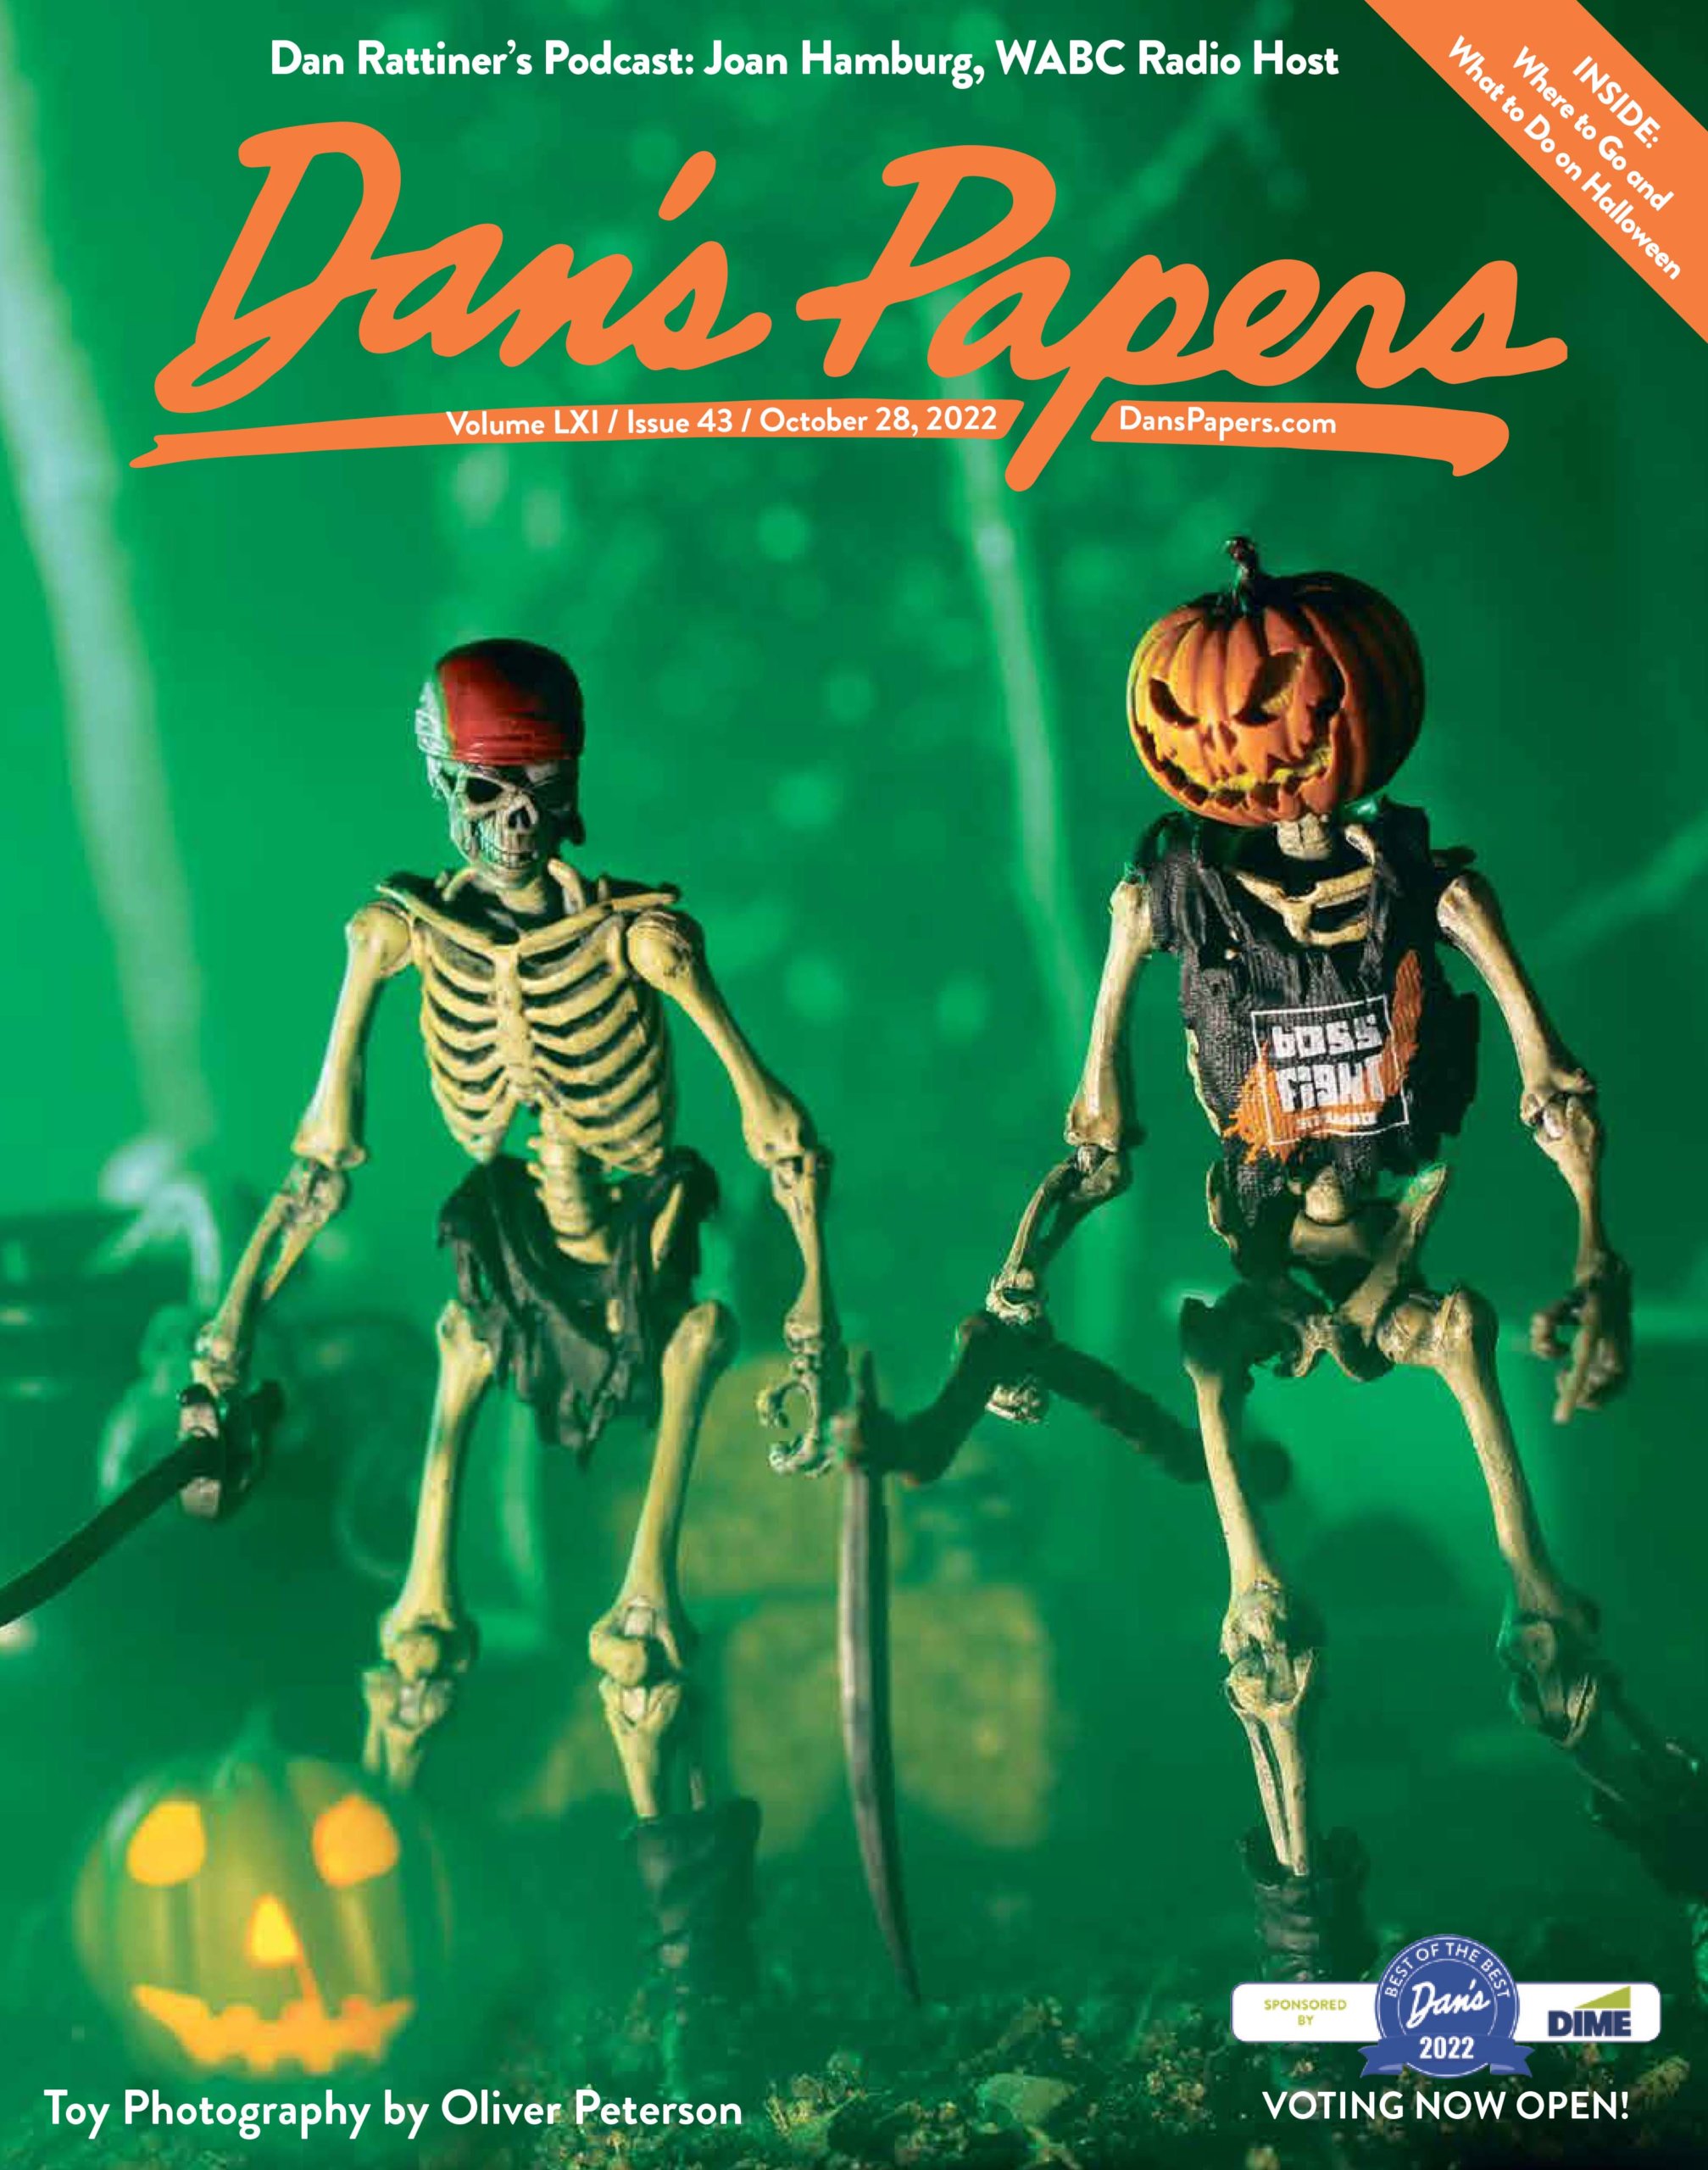 October 28, 2022 Dan's Papers cover art Halloween toy photography by Oliver Peterson